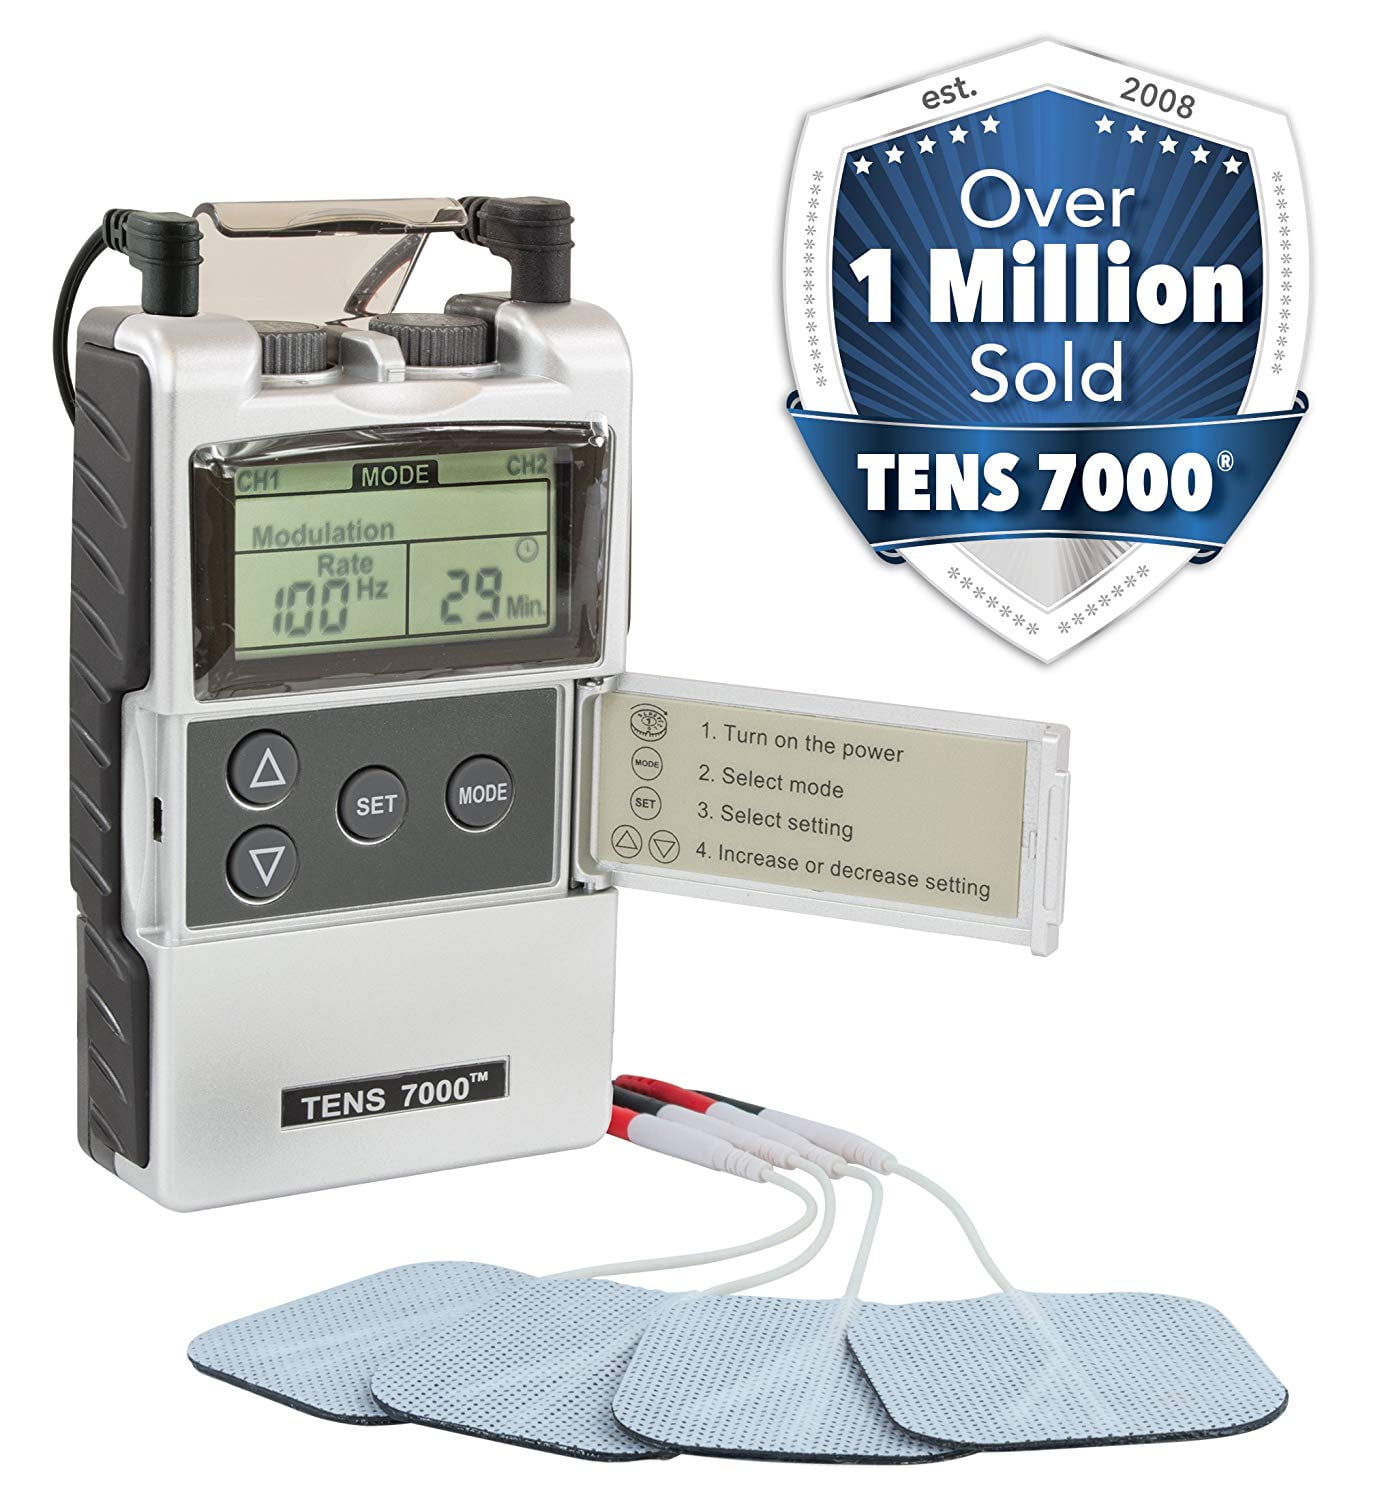 TENS 7000 Digital TENS Unit with Accessories - TENS Unit Muscle Stimulator  for Back Pain Relief, General Pain Relief, Neck Pain, Sciatica Pain Relief,  Nerve Pain Relief 